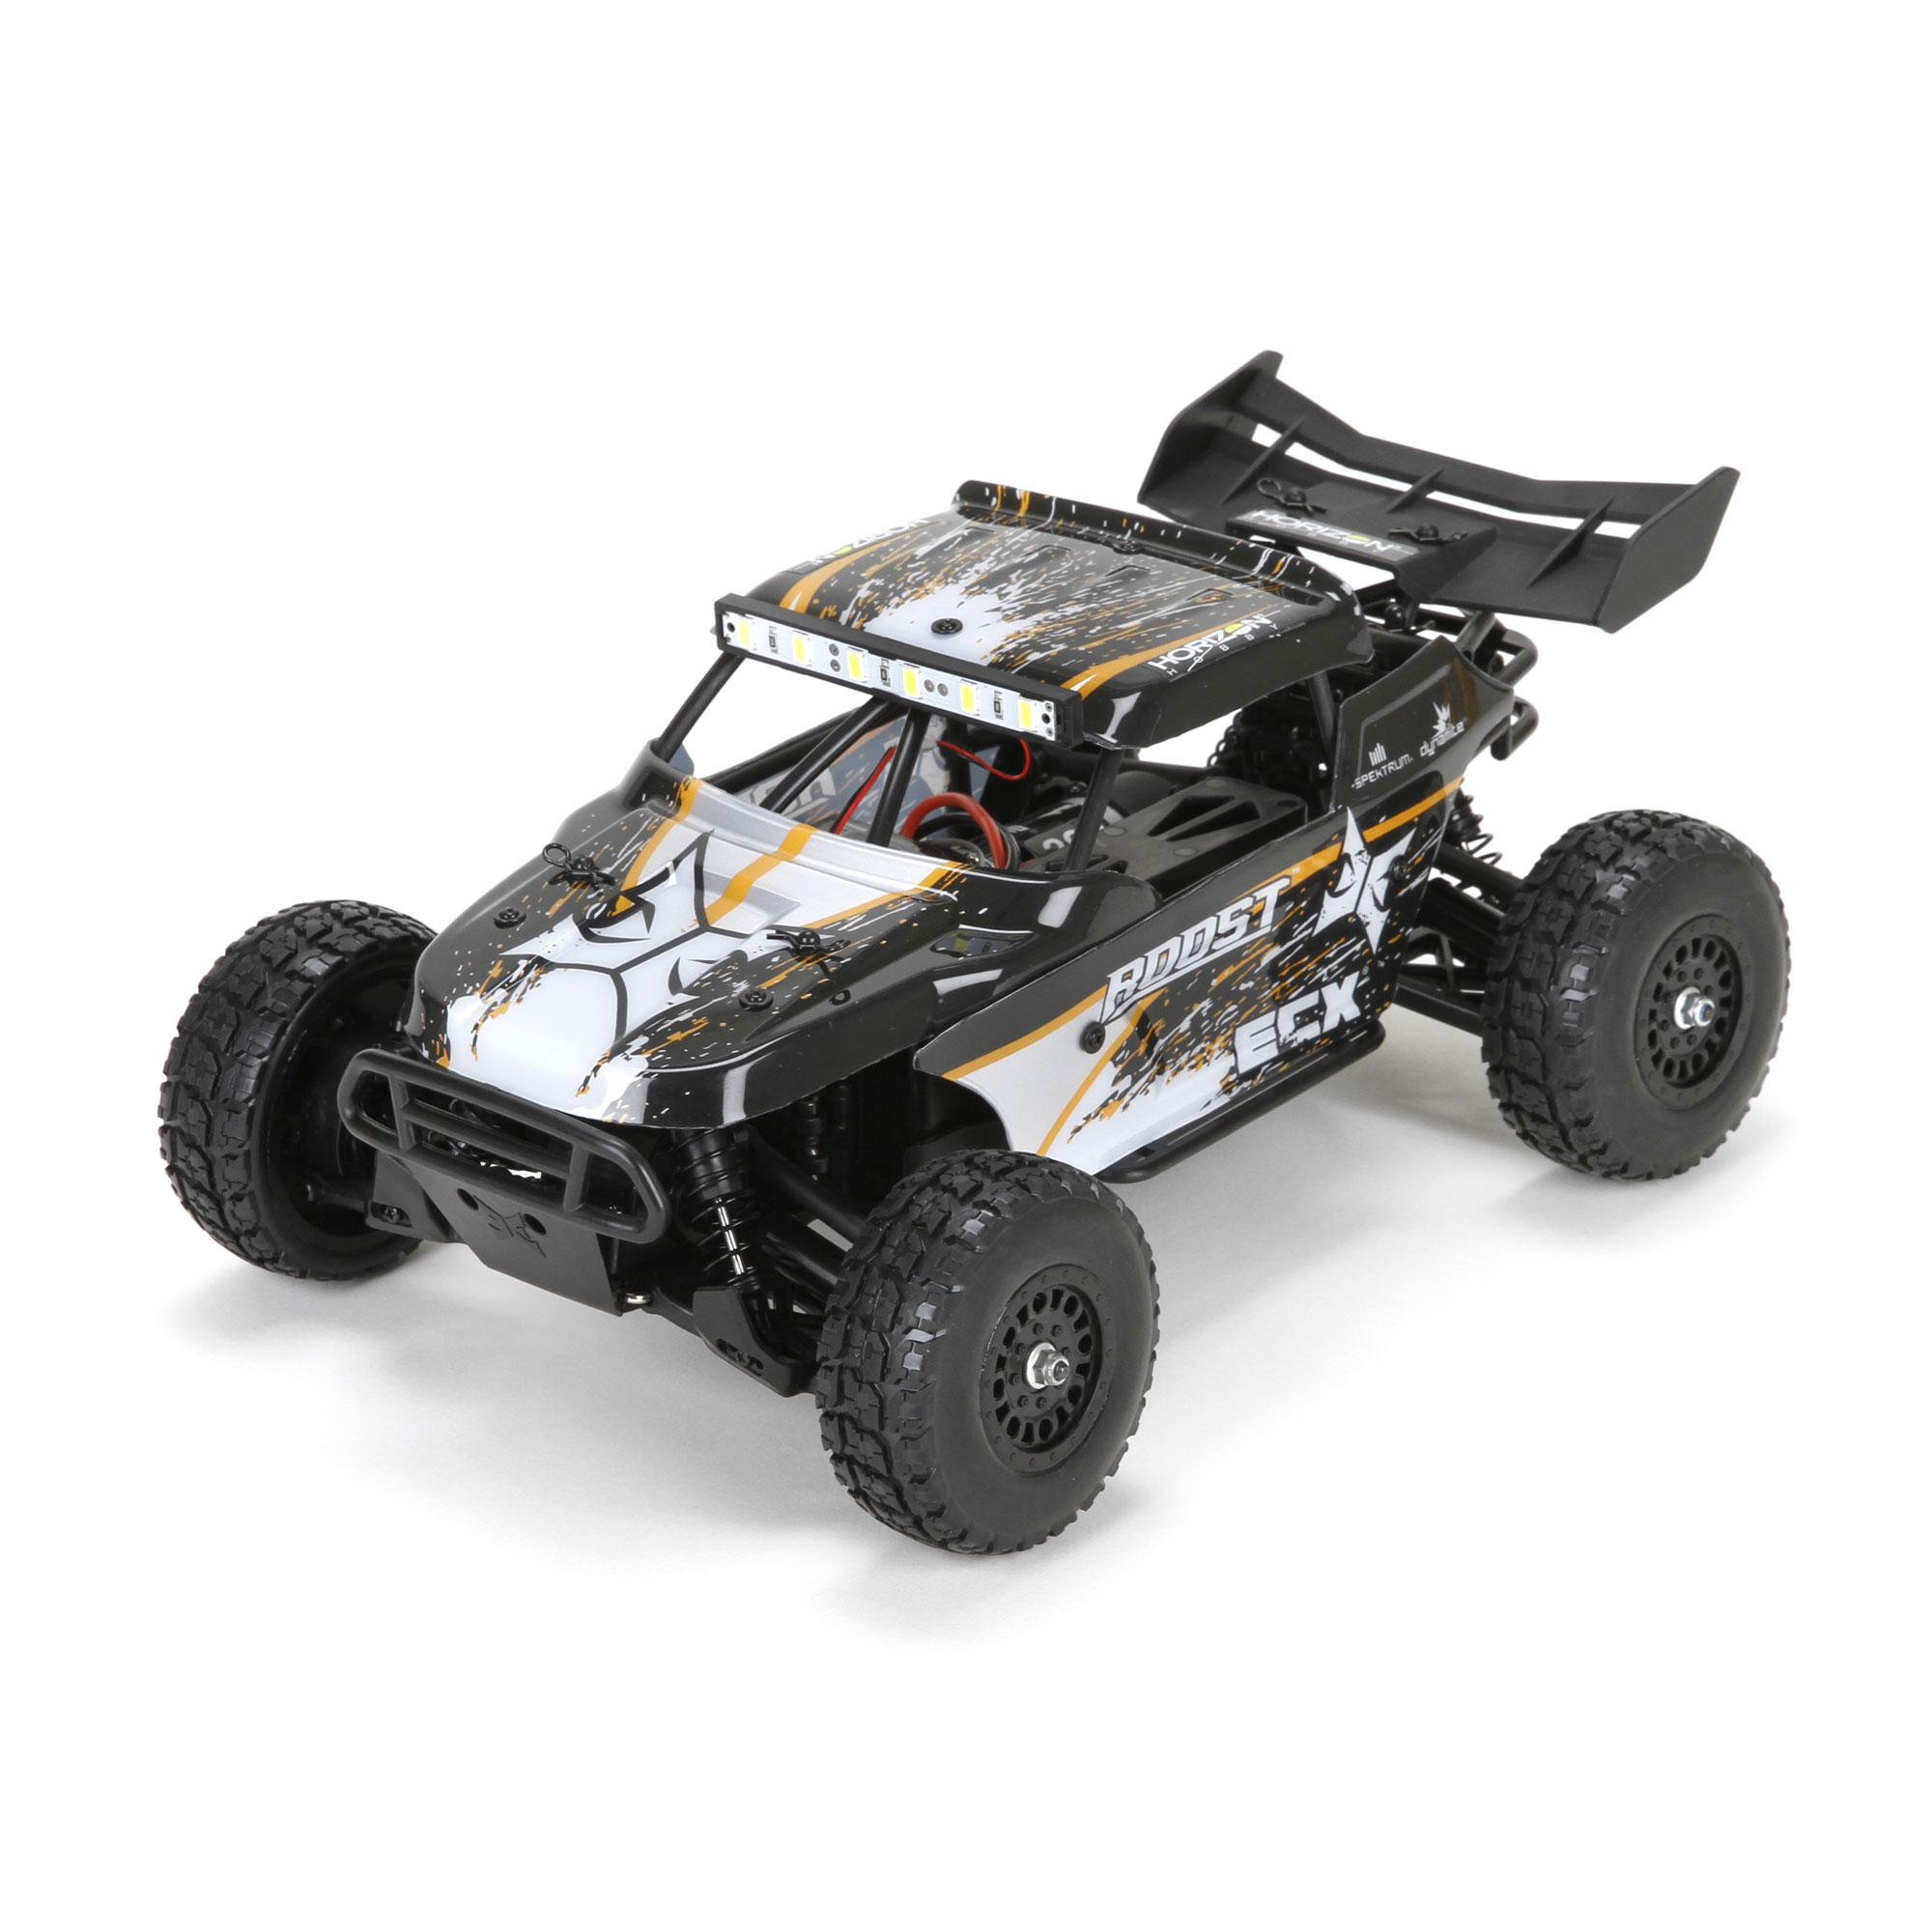 T2M # T4923 Pirate Sniper 4 WD 1-10 Off Road Elektro Buggy RTR gelb  ASB1 